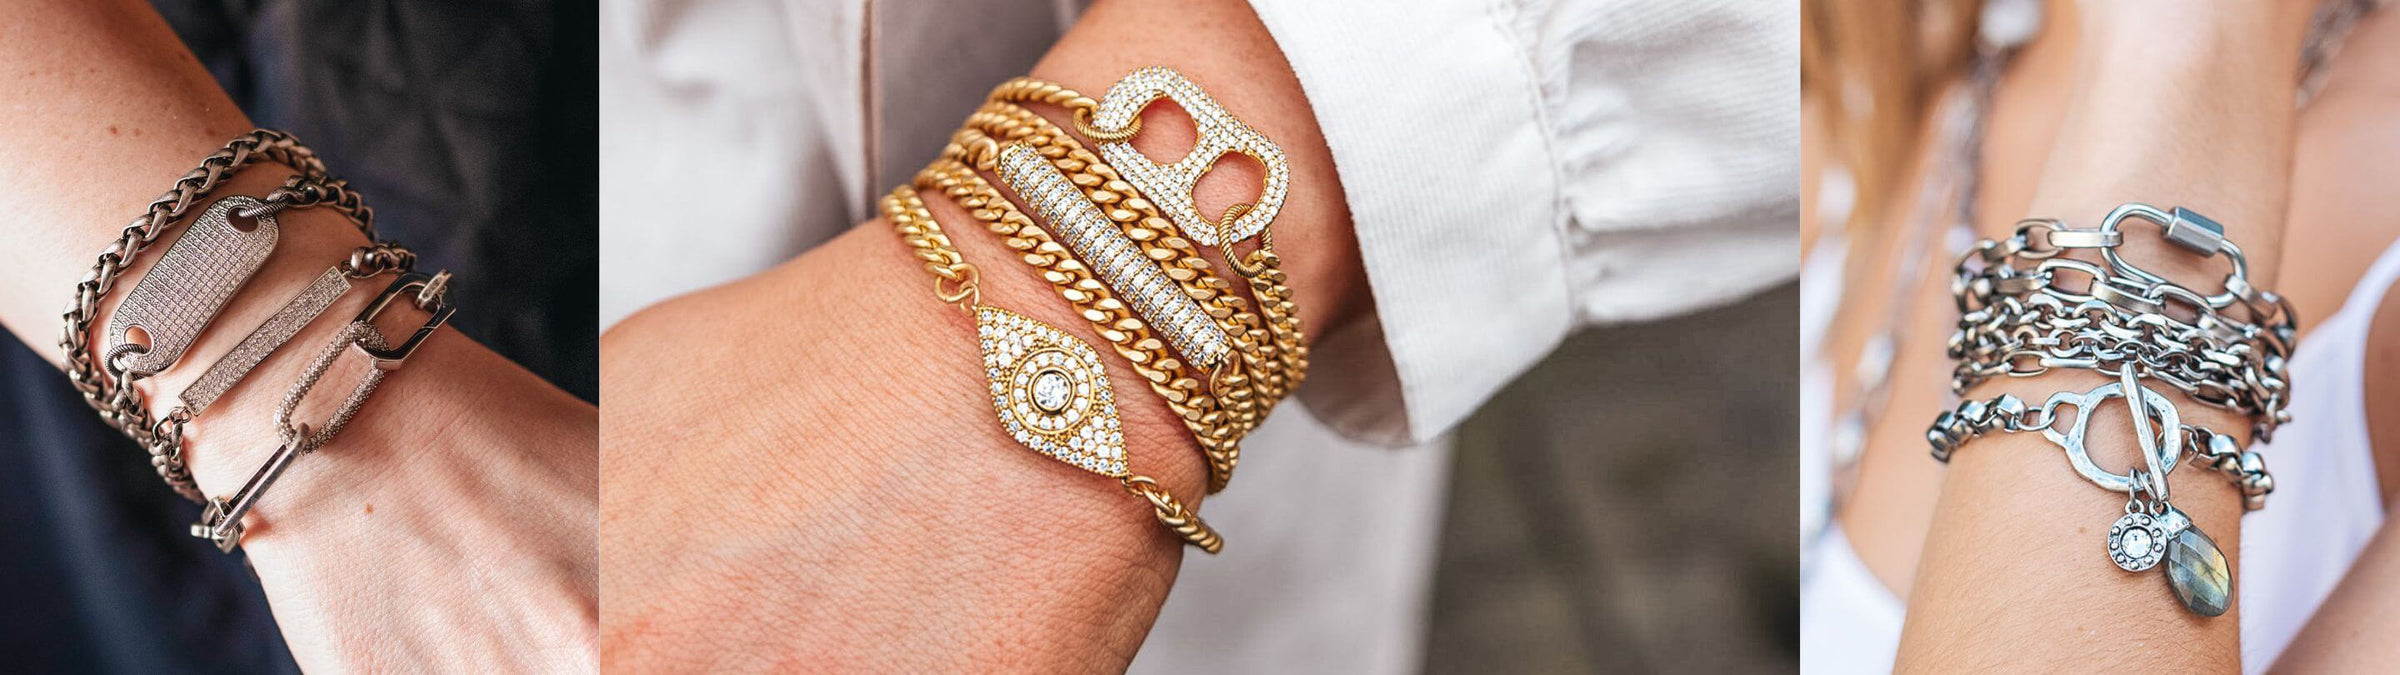 Header image showcasing Loni Paul's Stackable Bracelets collection, worn by women to express their unique, confident style.